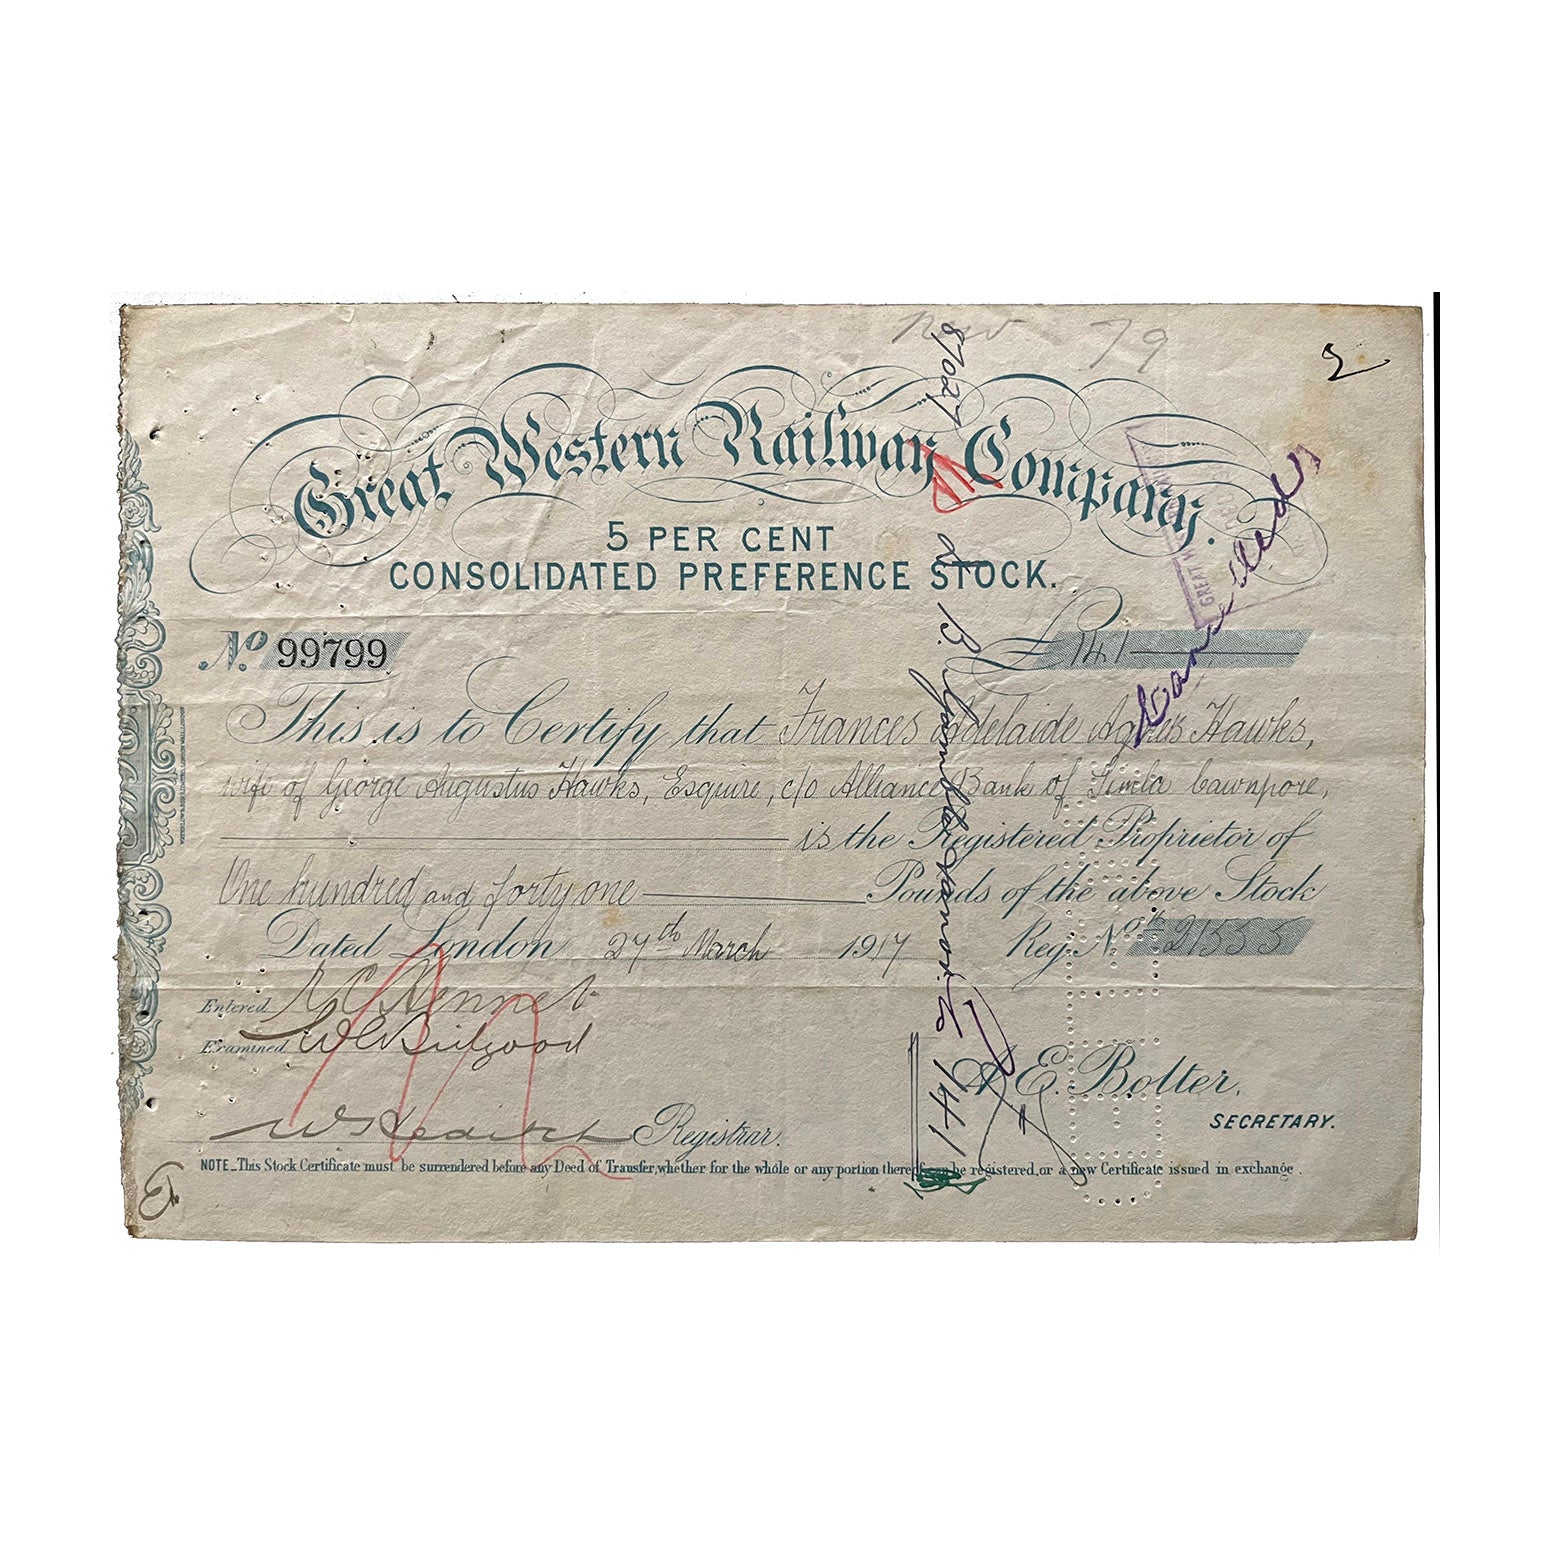 Original railway share certificate, Great Western Railway Company, 5% Consolidated Preference Stock, £141, issued 1917